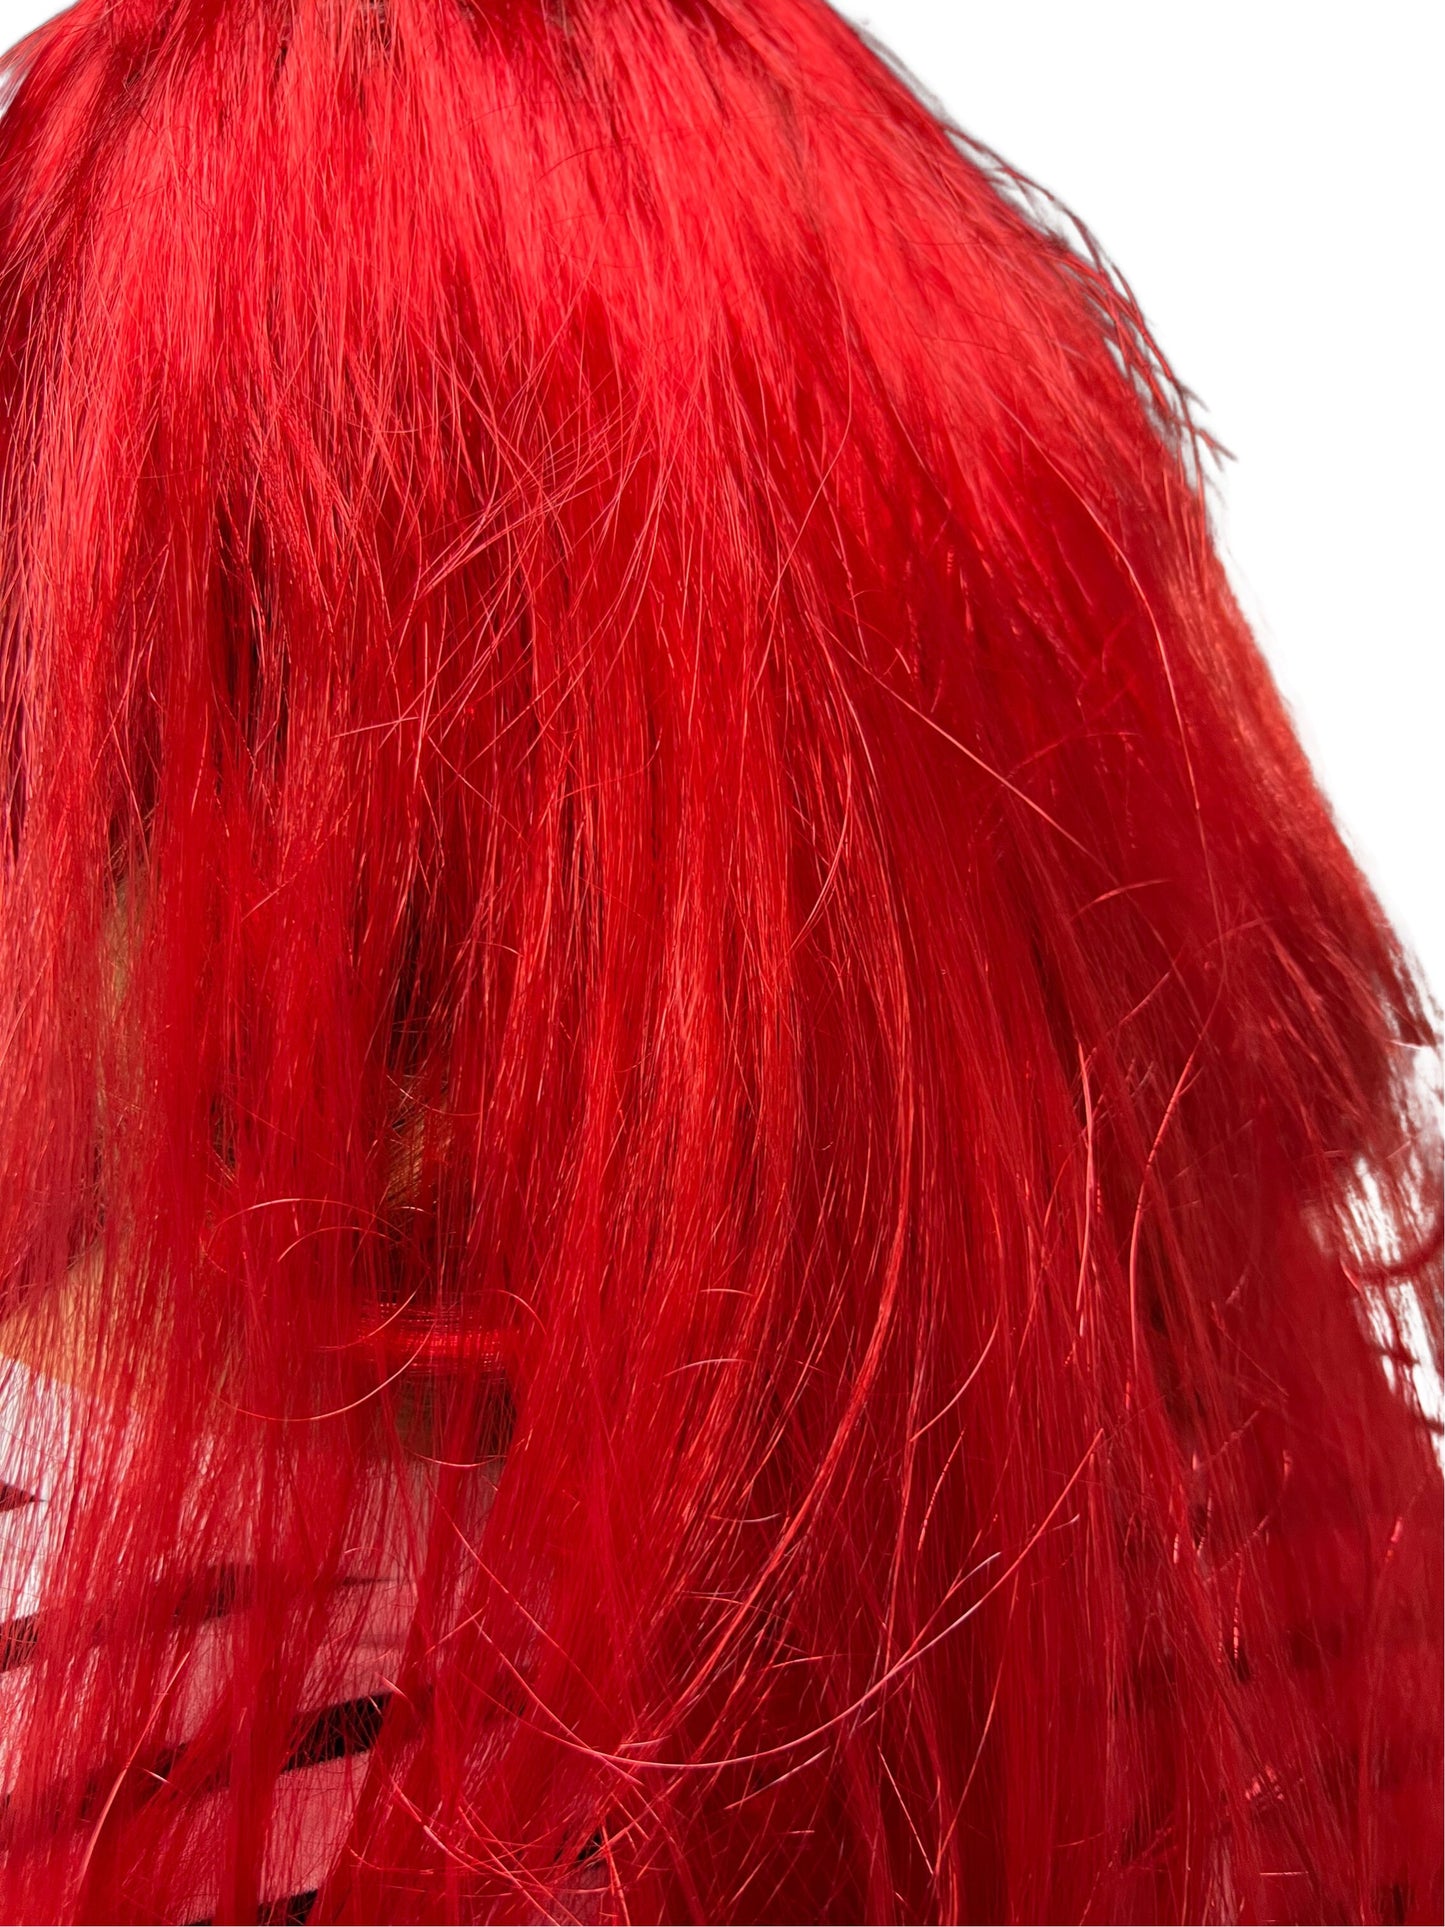 Ladies Long Red Fancy Dress Wig Ideal for Parties, Festivals, Concerts, Cosplay